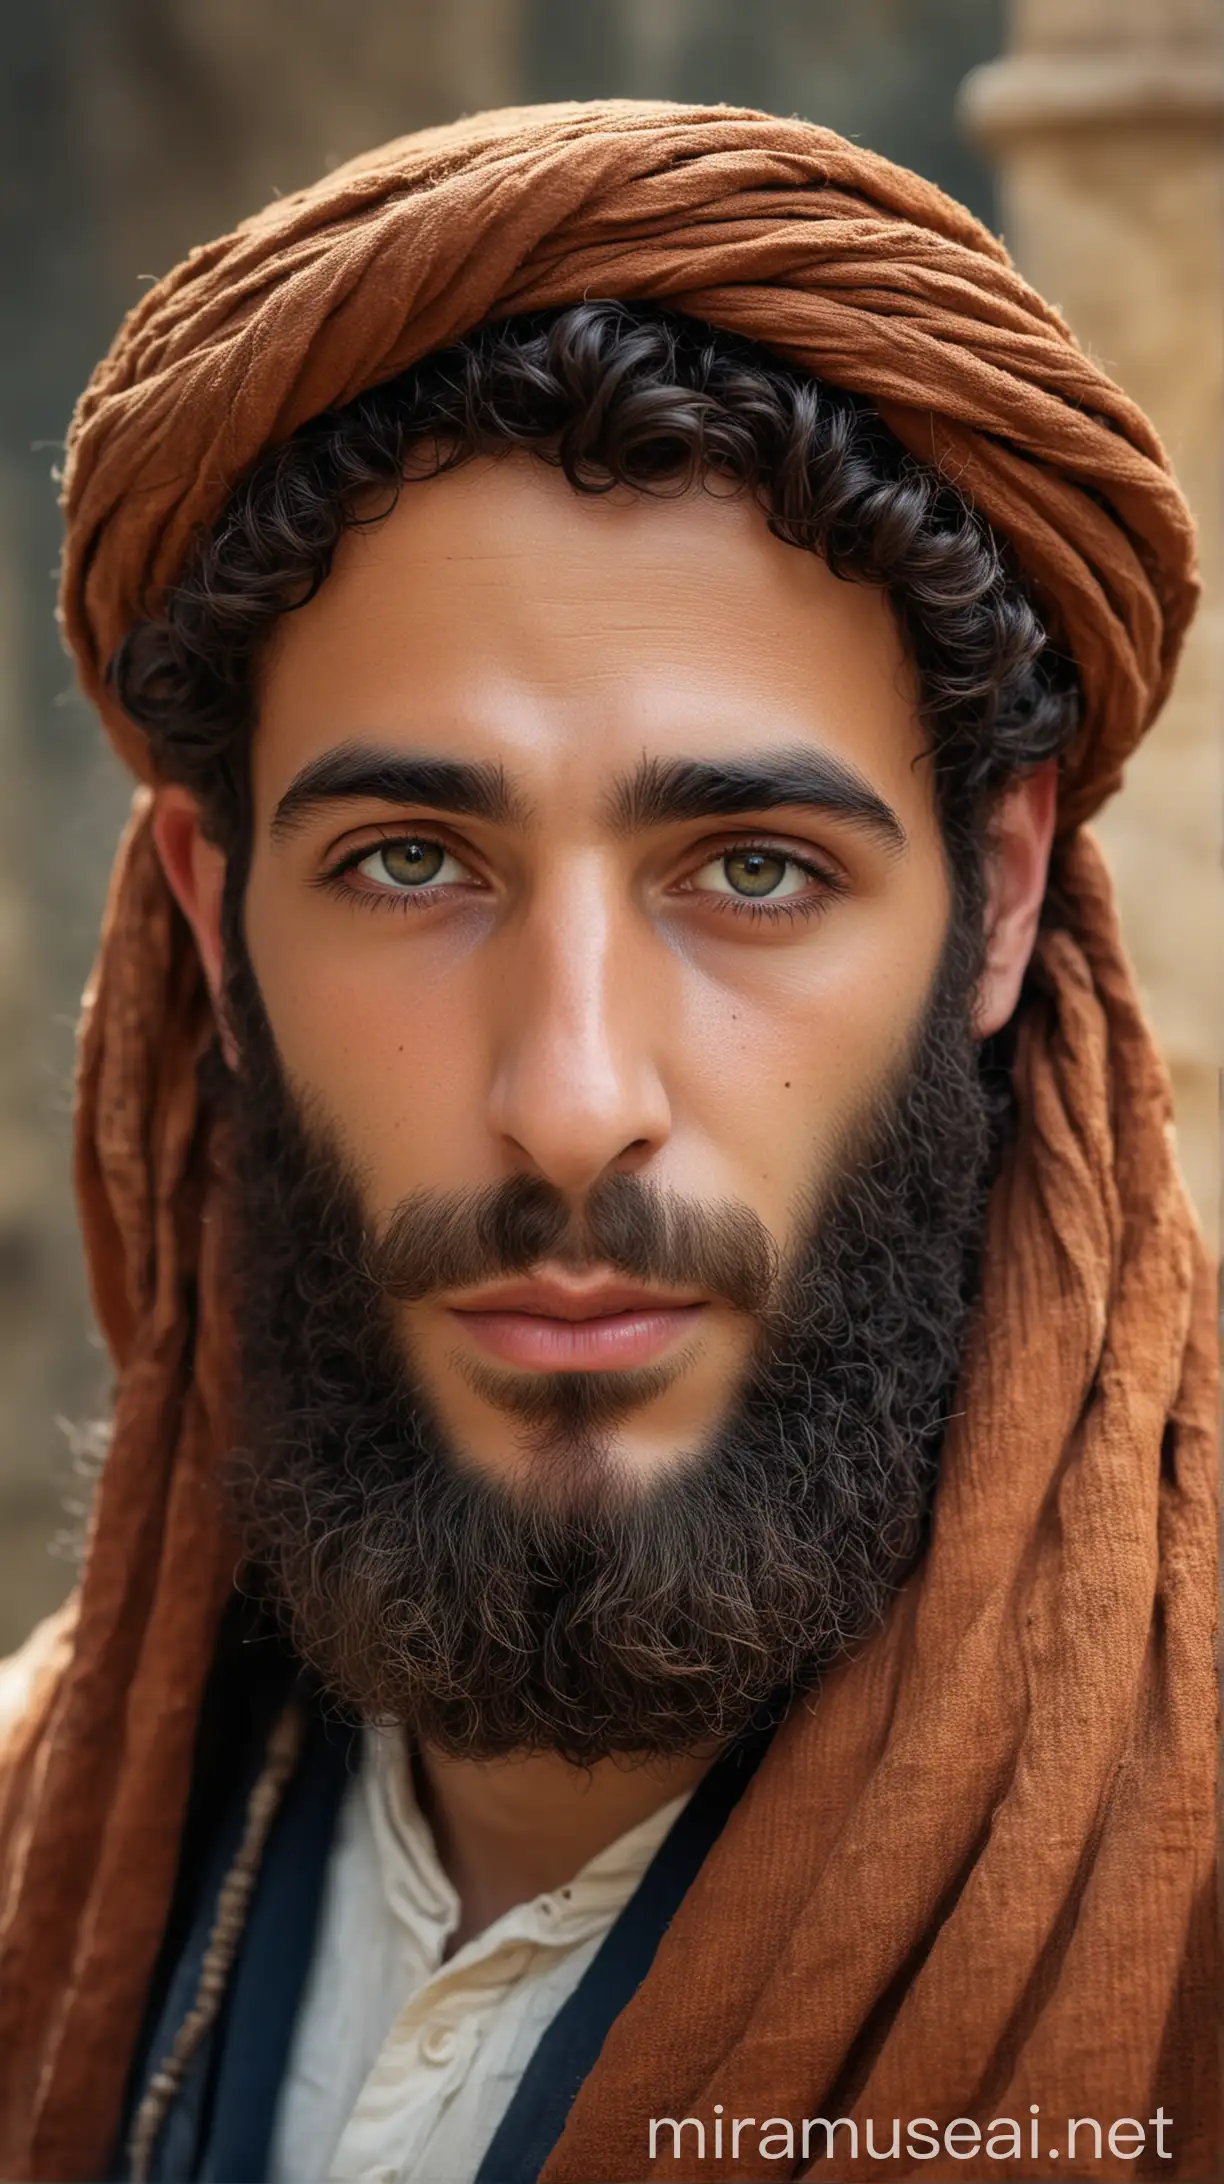 Handsome Jewish Man in Ancient Setting